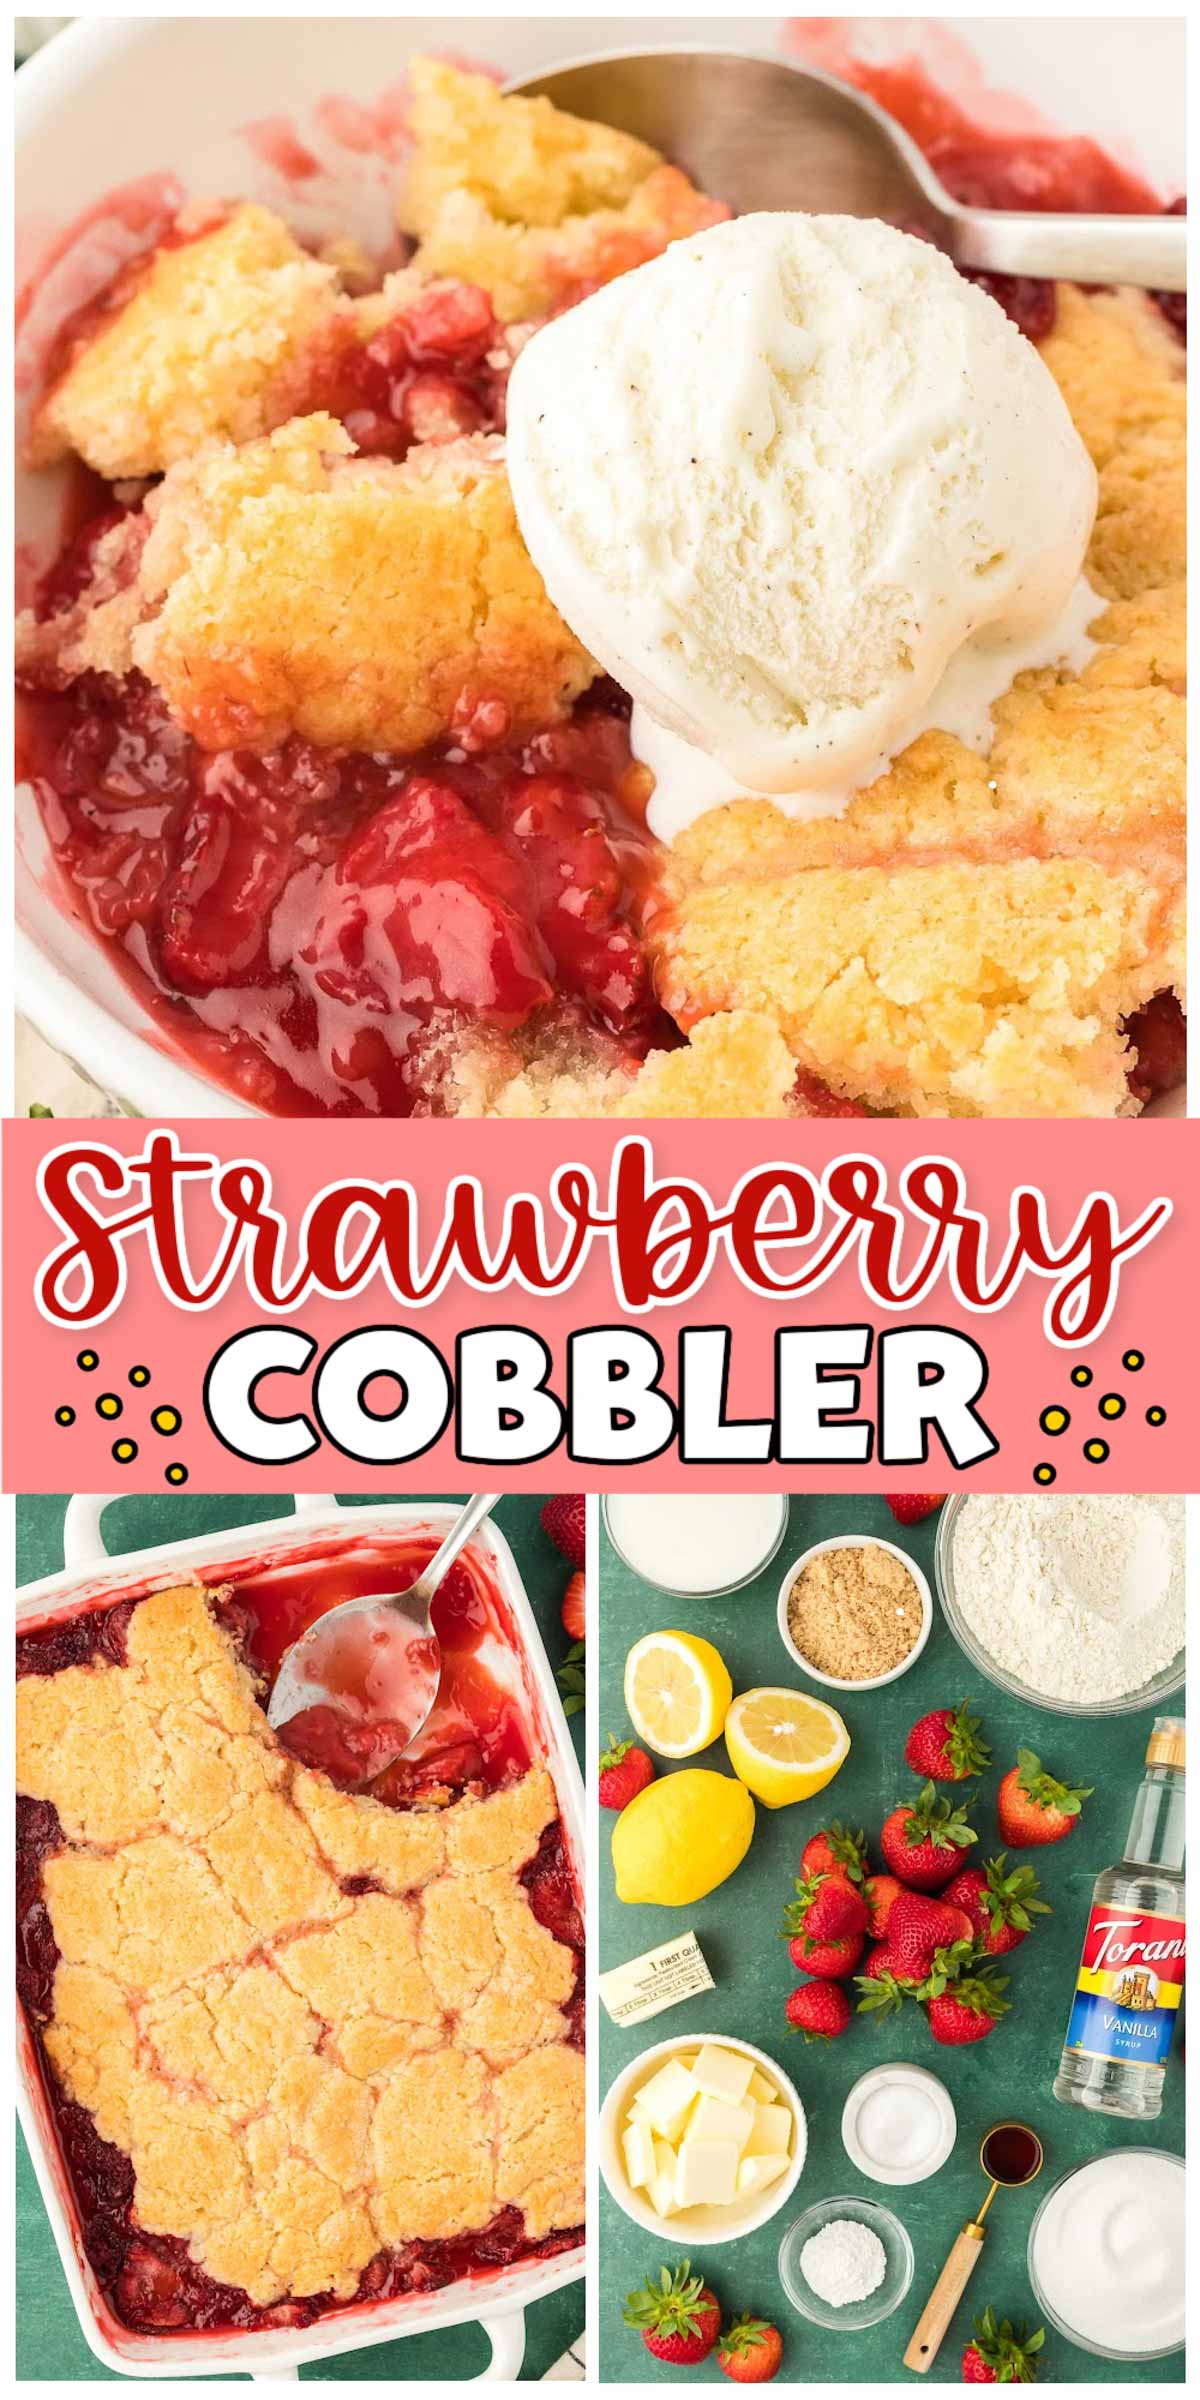 Strawberry Cobbler is a classic dessert filled with fruity, seasonal flavor and a golden-brown sweet biscuit-like topping to create an irresistible summertime treat! via @sugarandsoulco